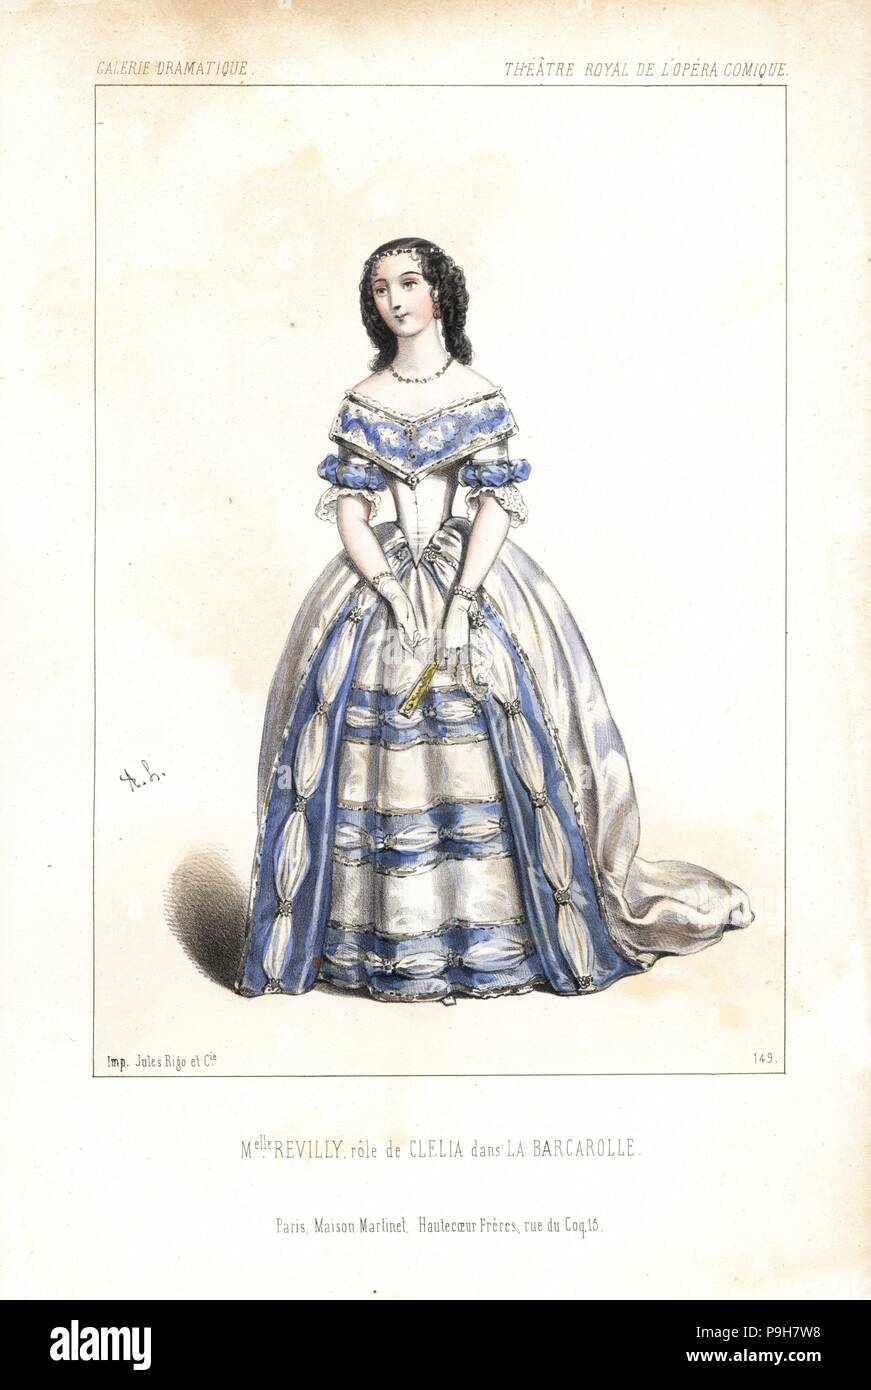 Antoinette-Jeanne Revilly in the role of Clelia in Auber's La Barcarolle, Opera Comique, 1845. Handcoloured lithograph after an illustration by Alexandre Lacauchie from Victor Dollet's Galerie Dramatique: Costumes des Theatres de Paris, Paris, 1845. Stock Photo